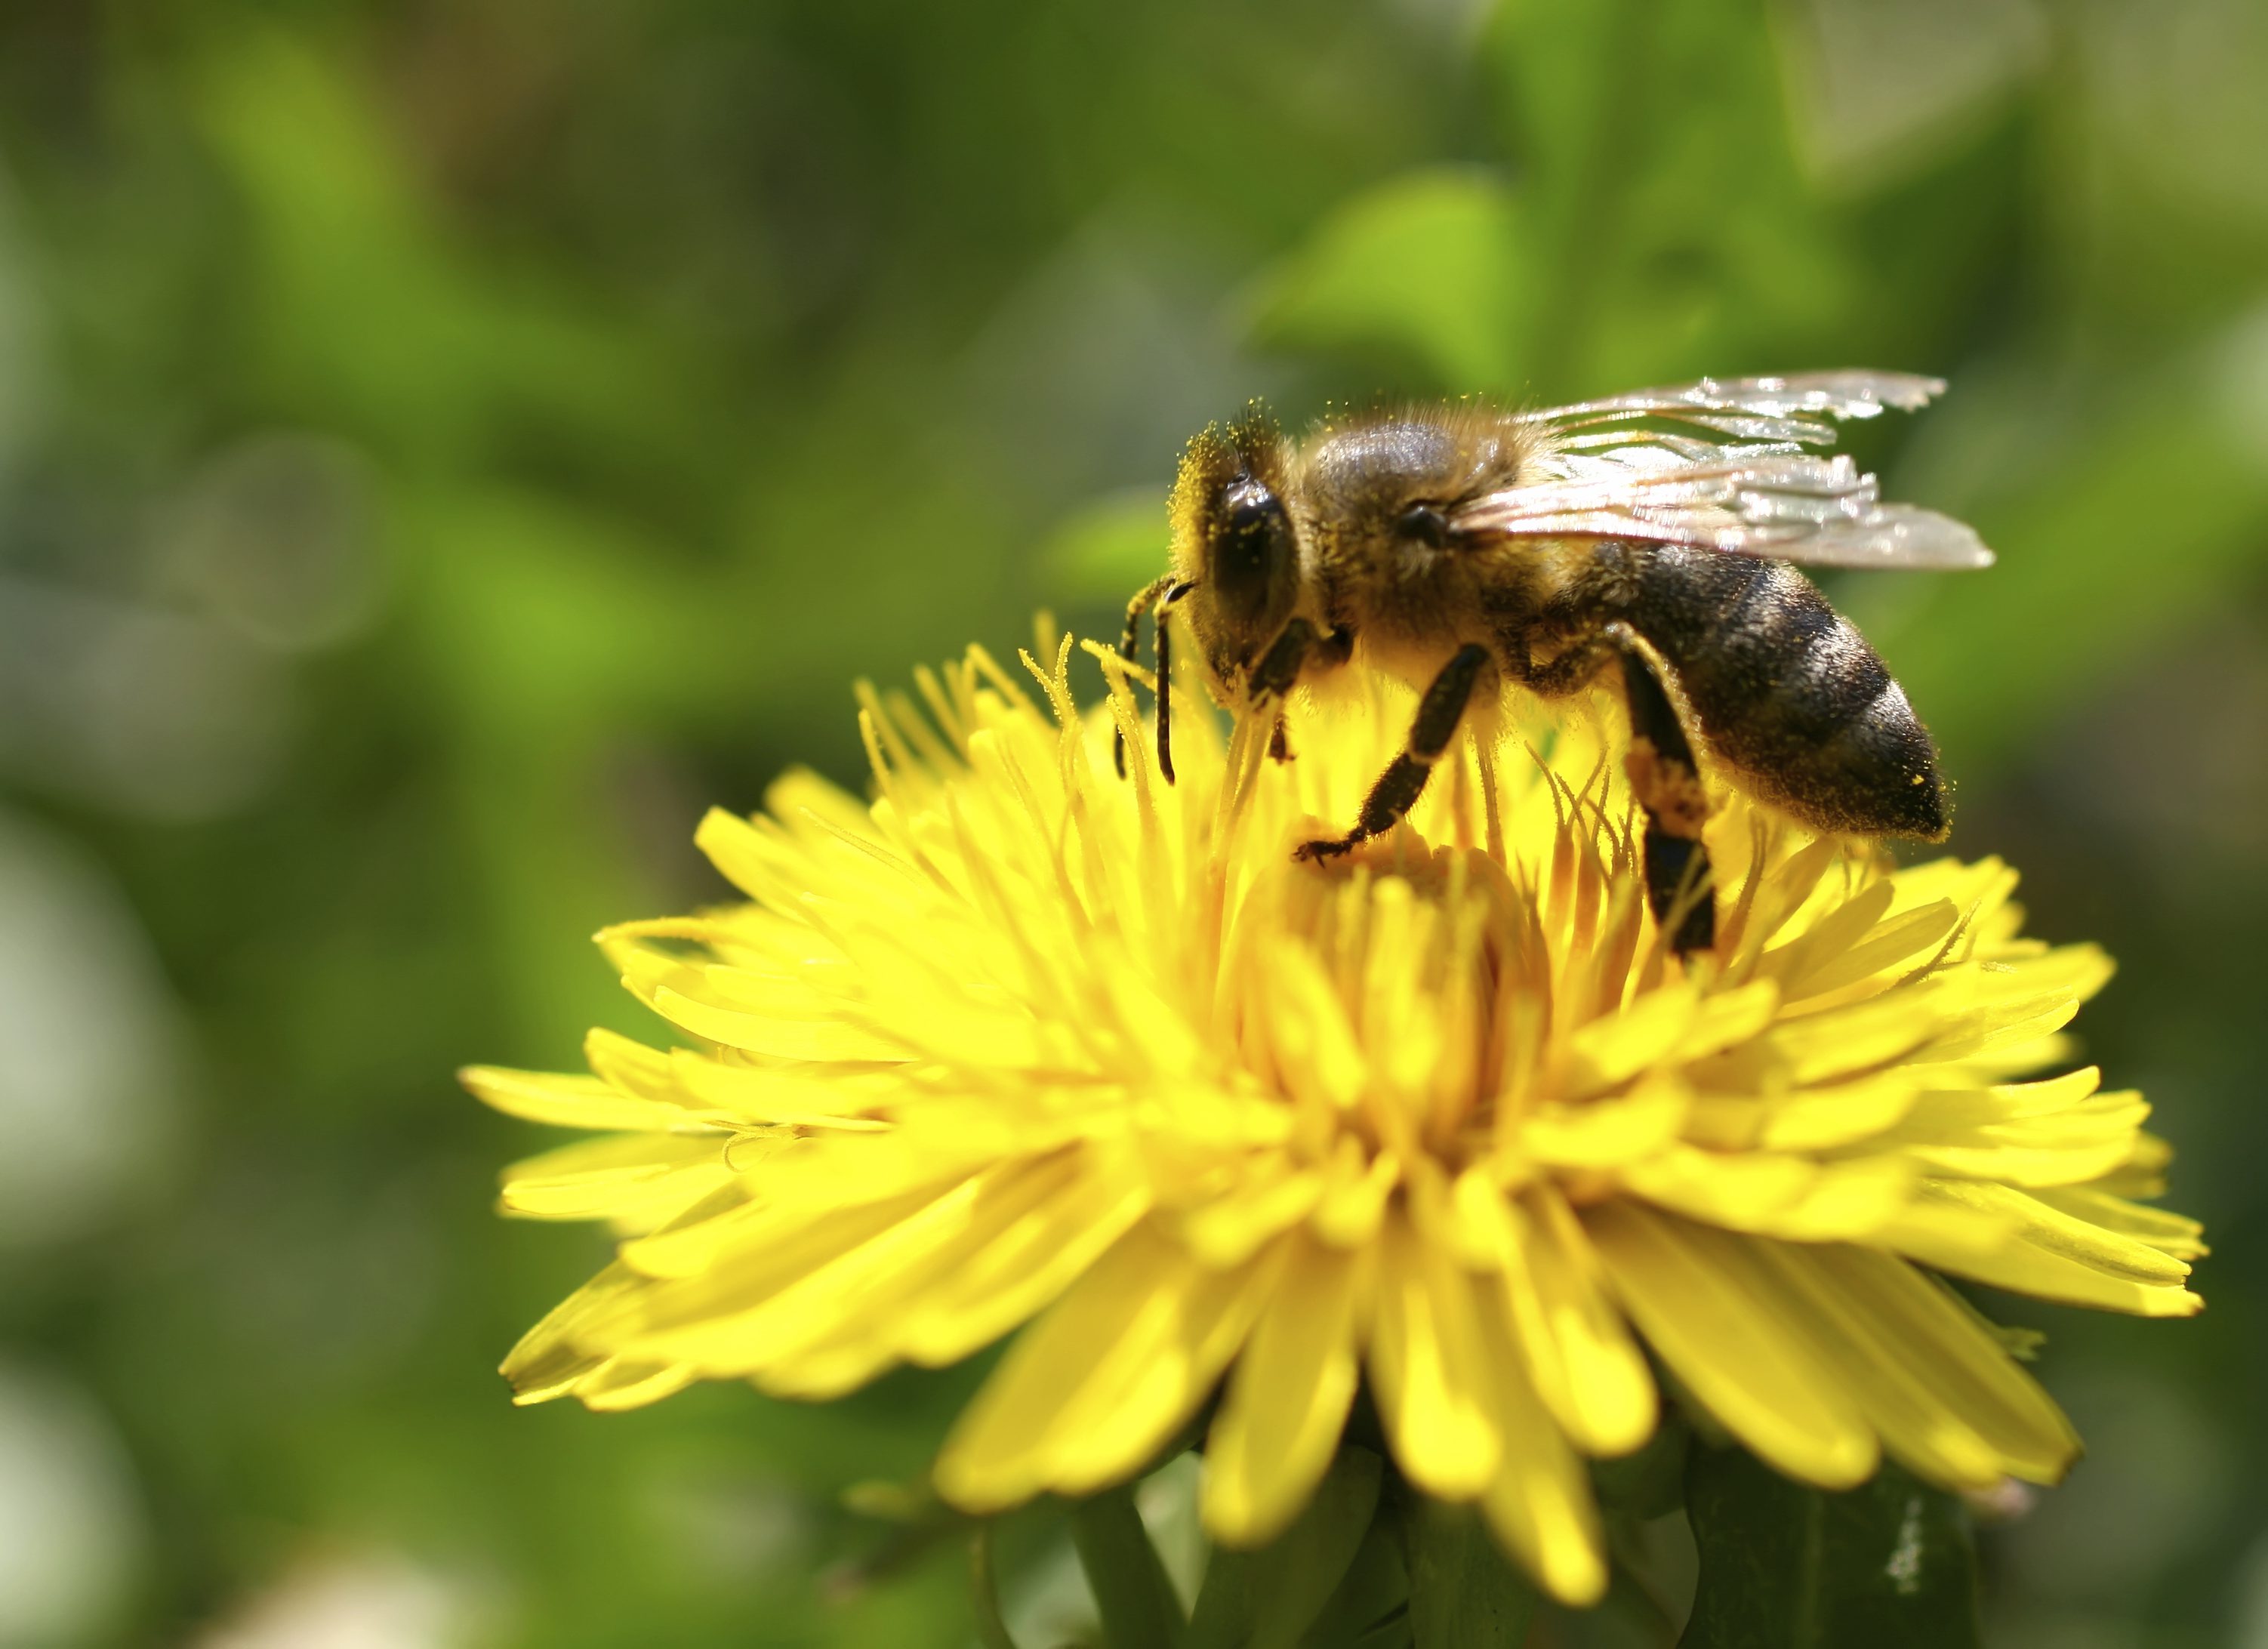 neonics and bees